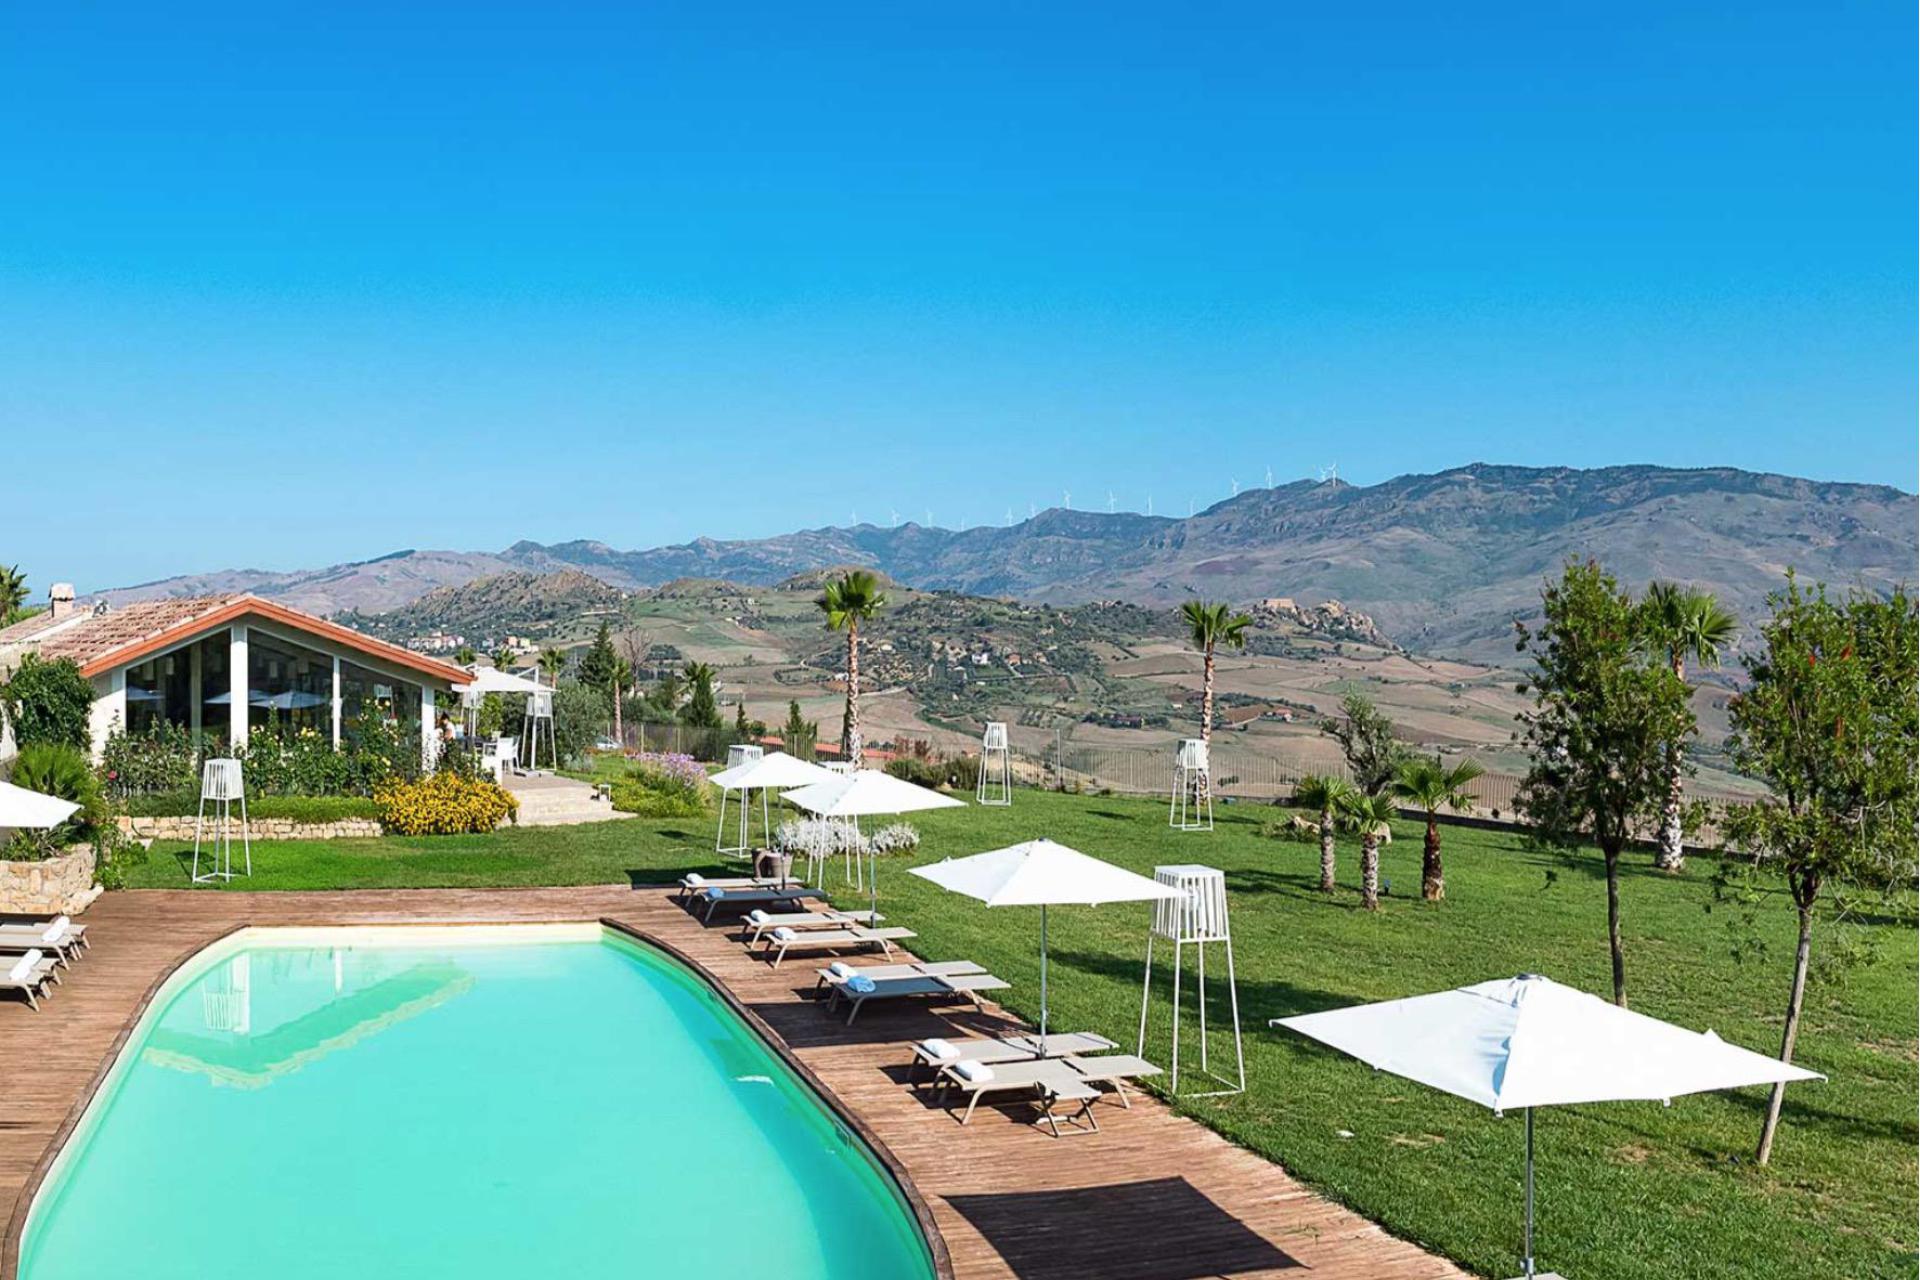 Agriturismo with views of the Etna